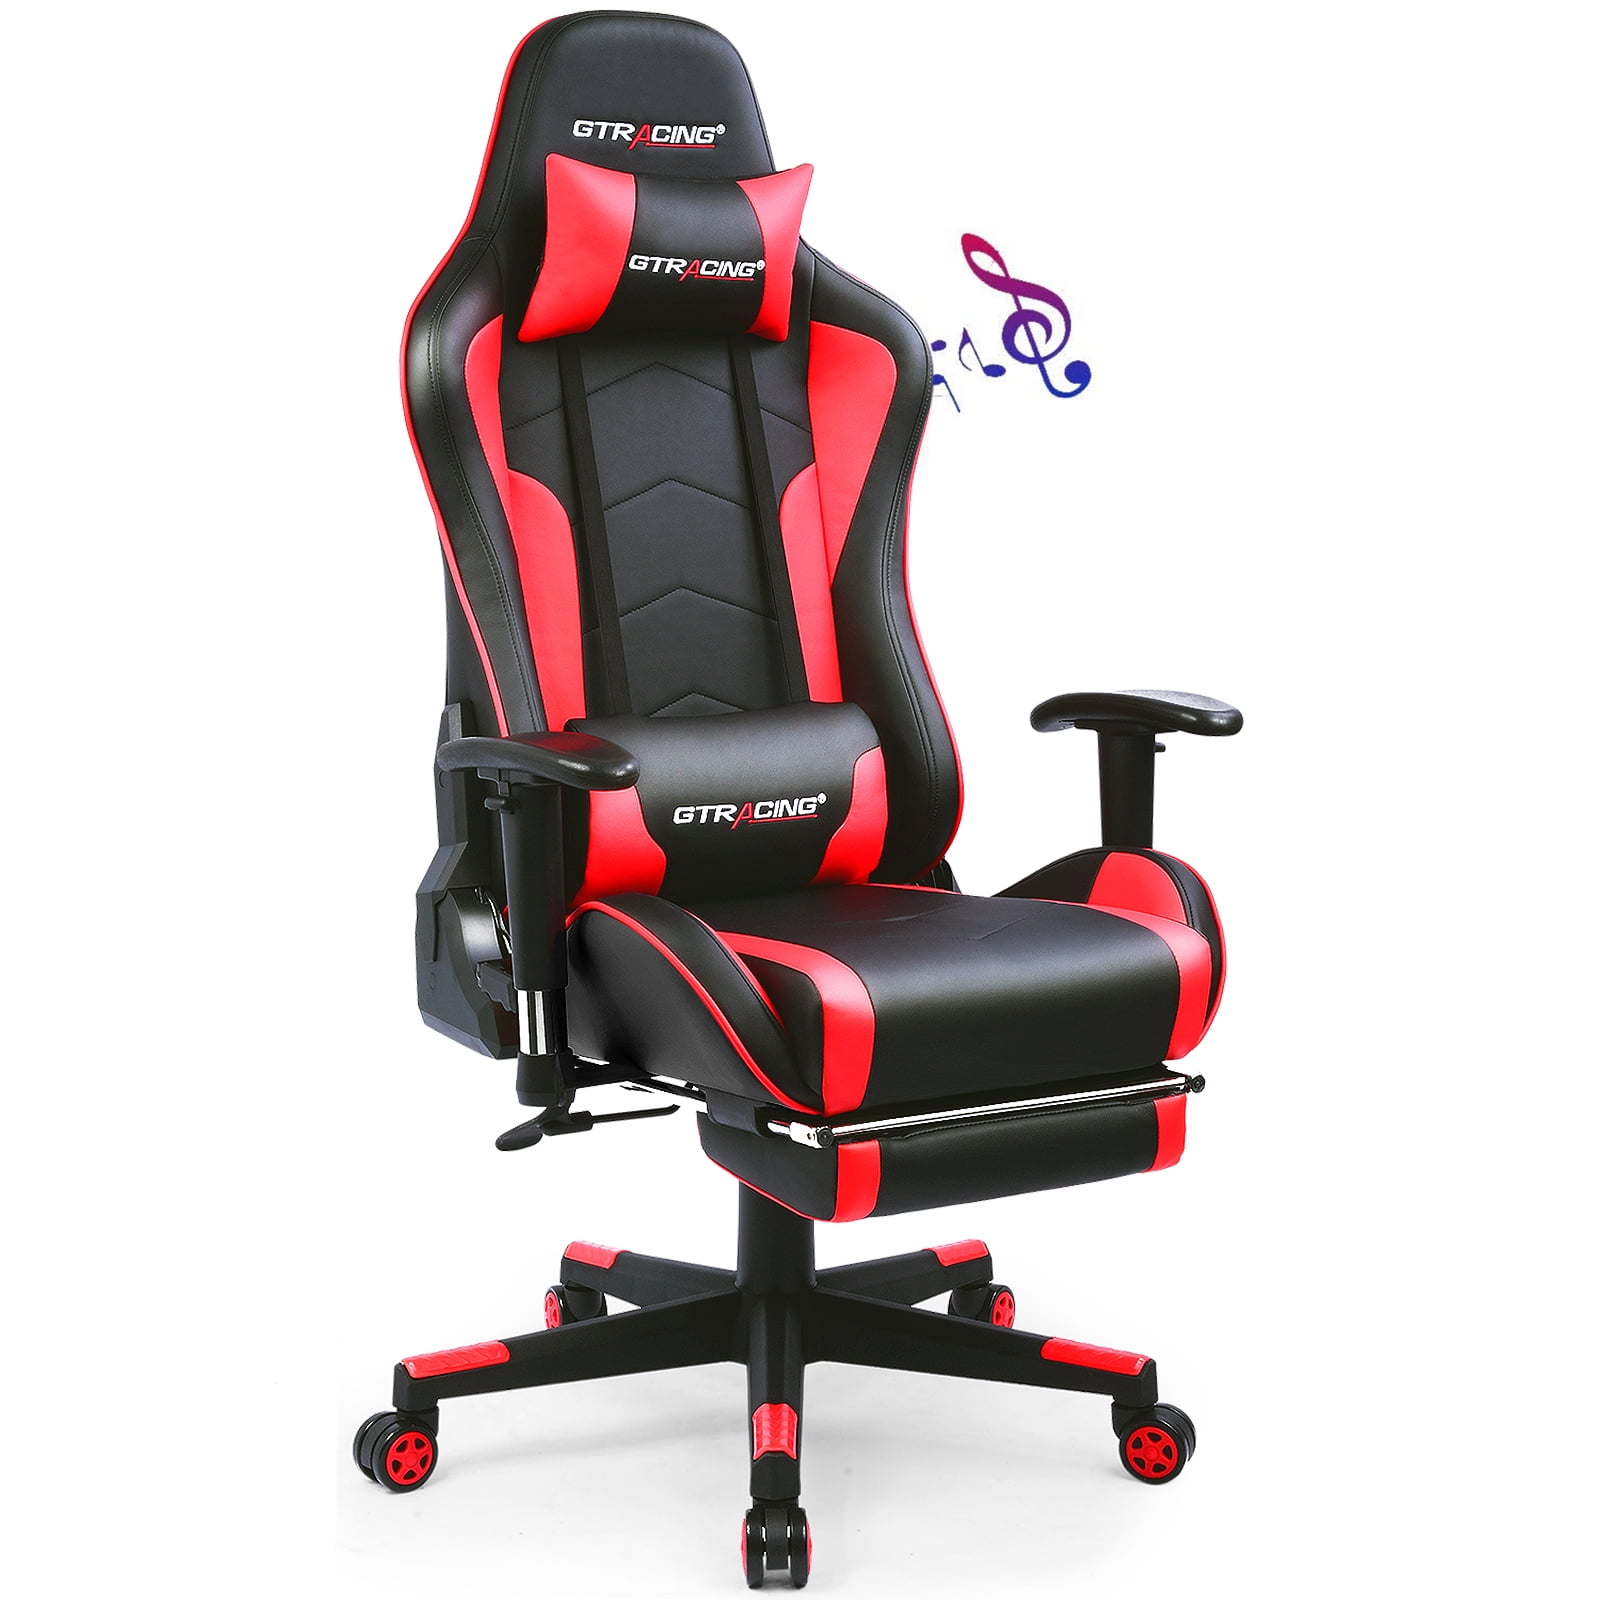 LUCKLIFE Gaming Chair with Bluetooth Speakers and Footrest High Back PU Leather Office Chair, Red